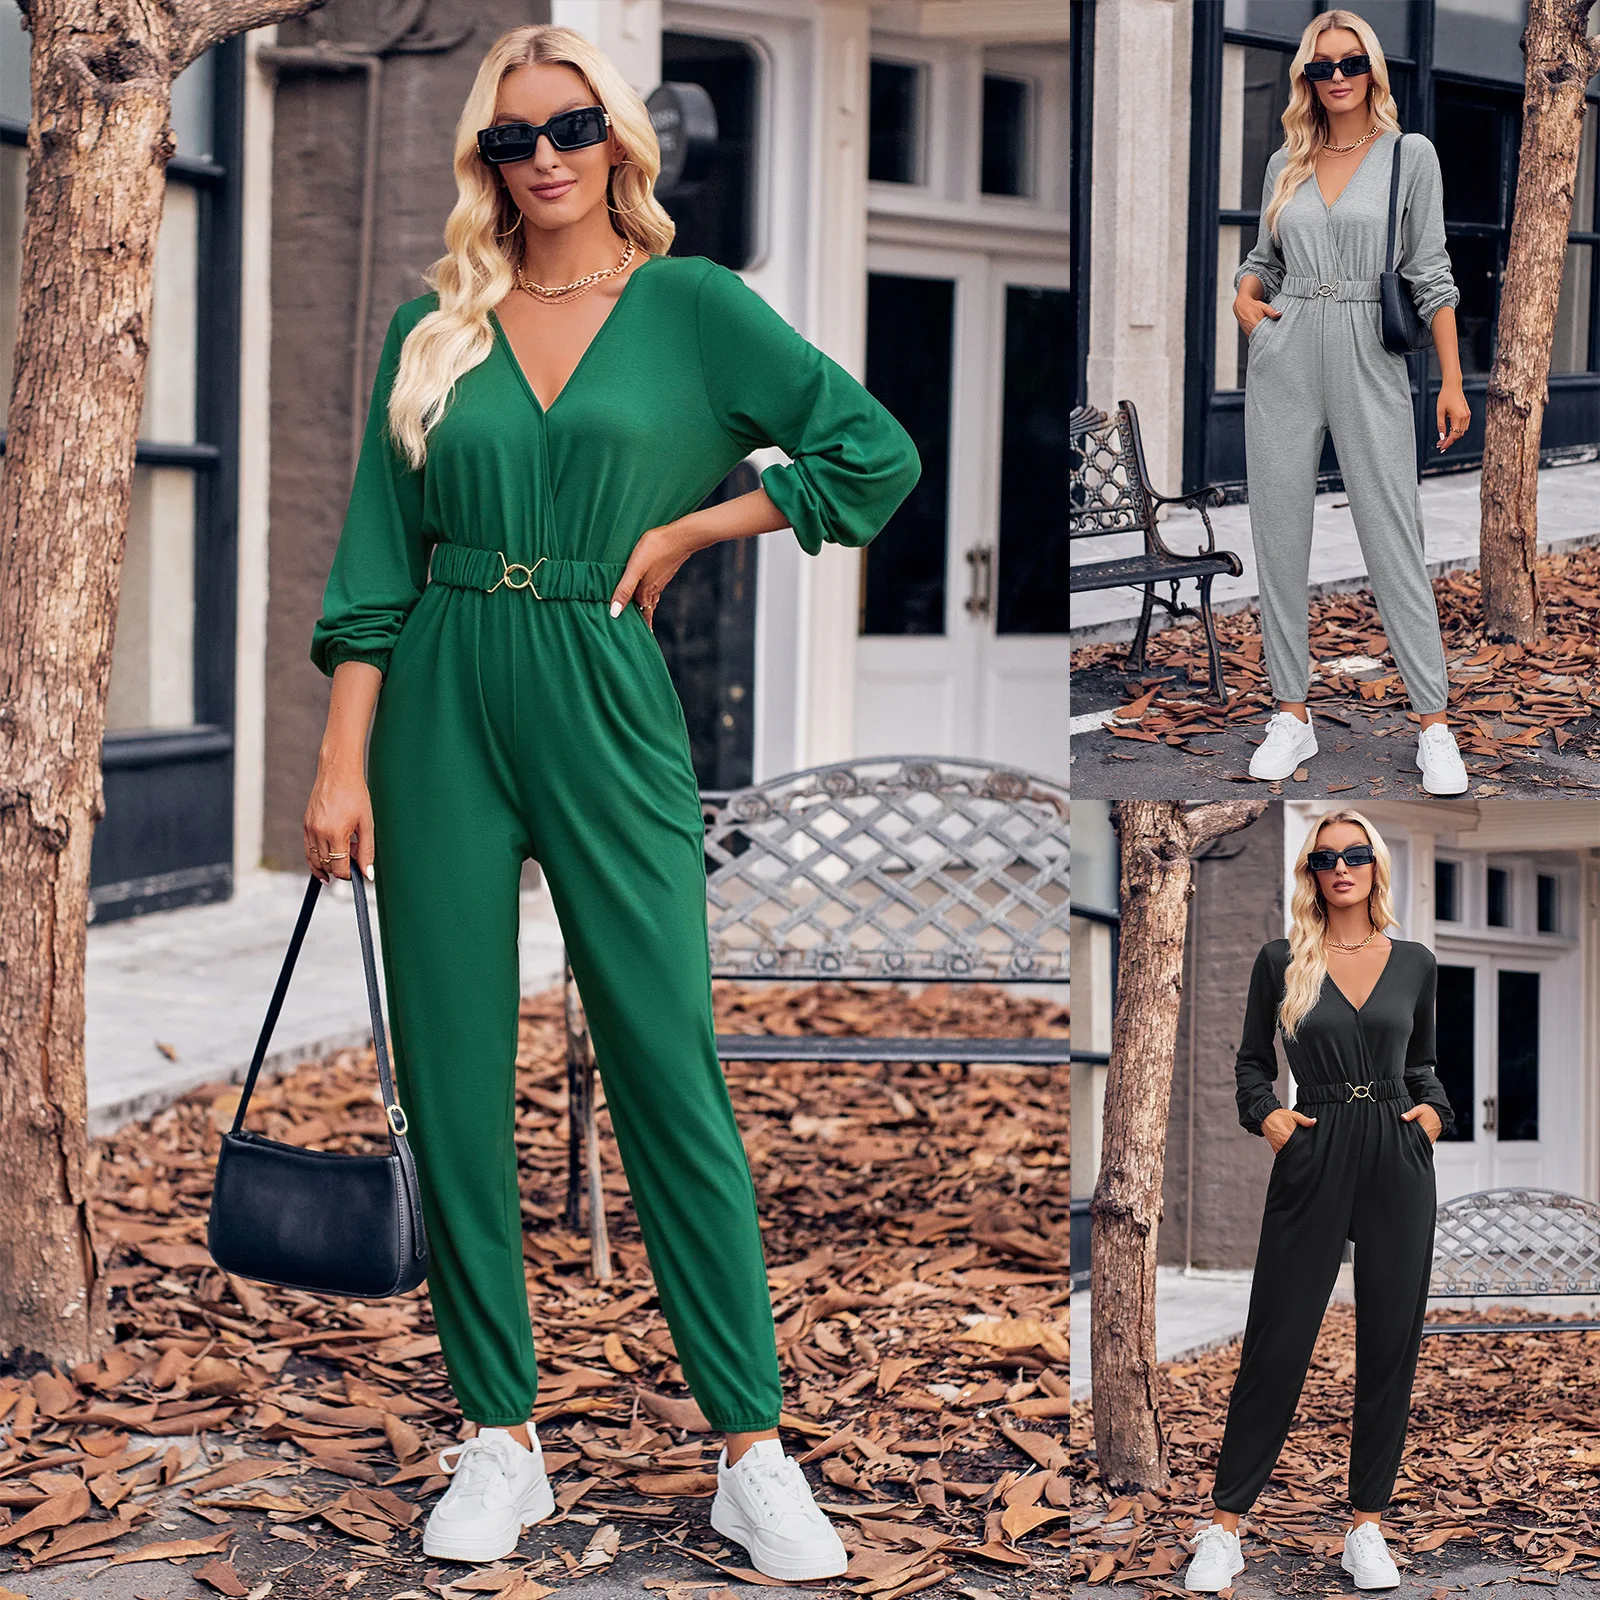 

V-neck Long Sleeve Slim Rompers Solid Bodycon Playsuit Women Jumpsuit Long Sleeve Female Elegant Playsuits Overalls for Women